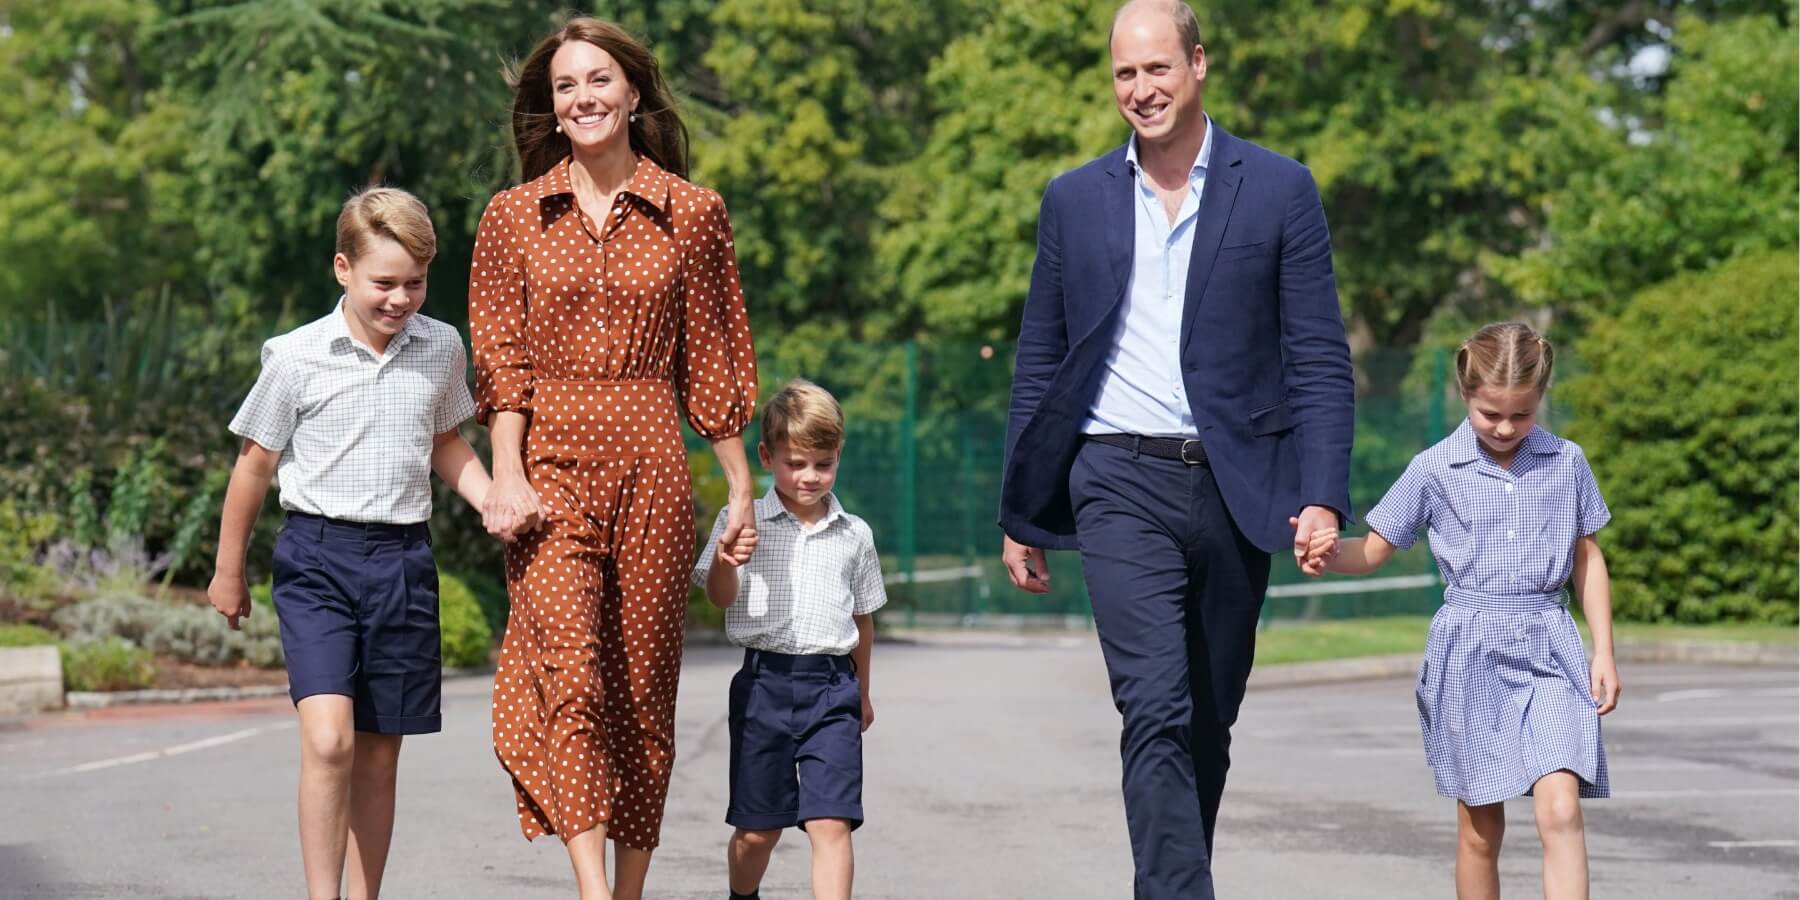 Kate Middleton and Prince William with their three children Prince George, Princess Charlotte and Prince Louis